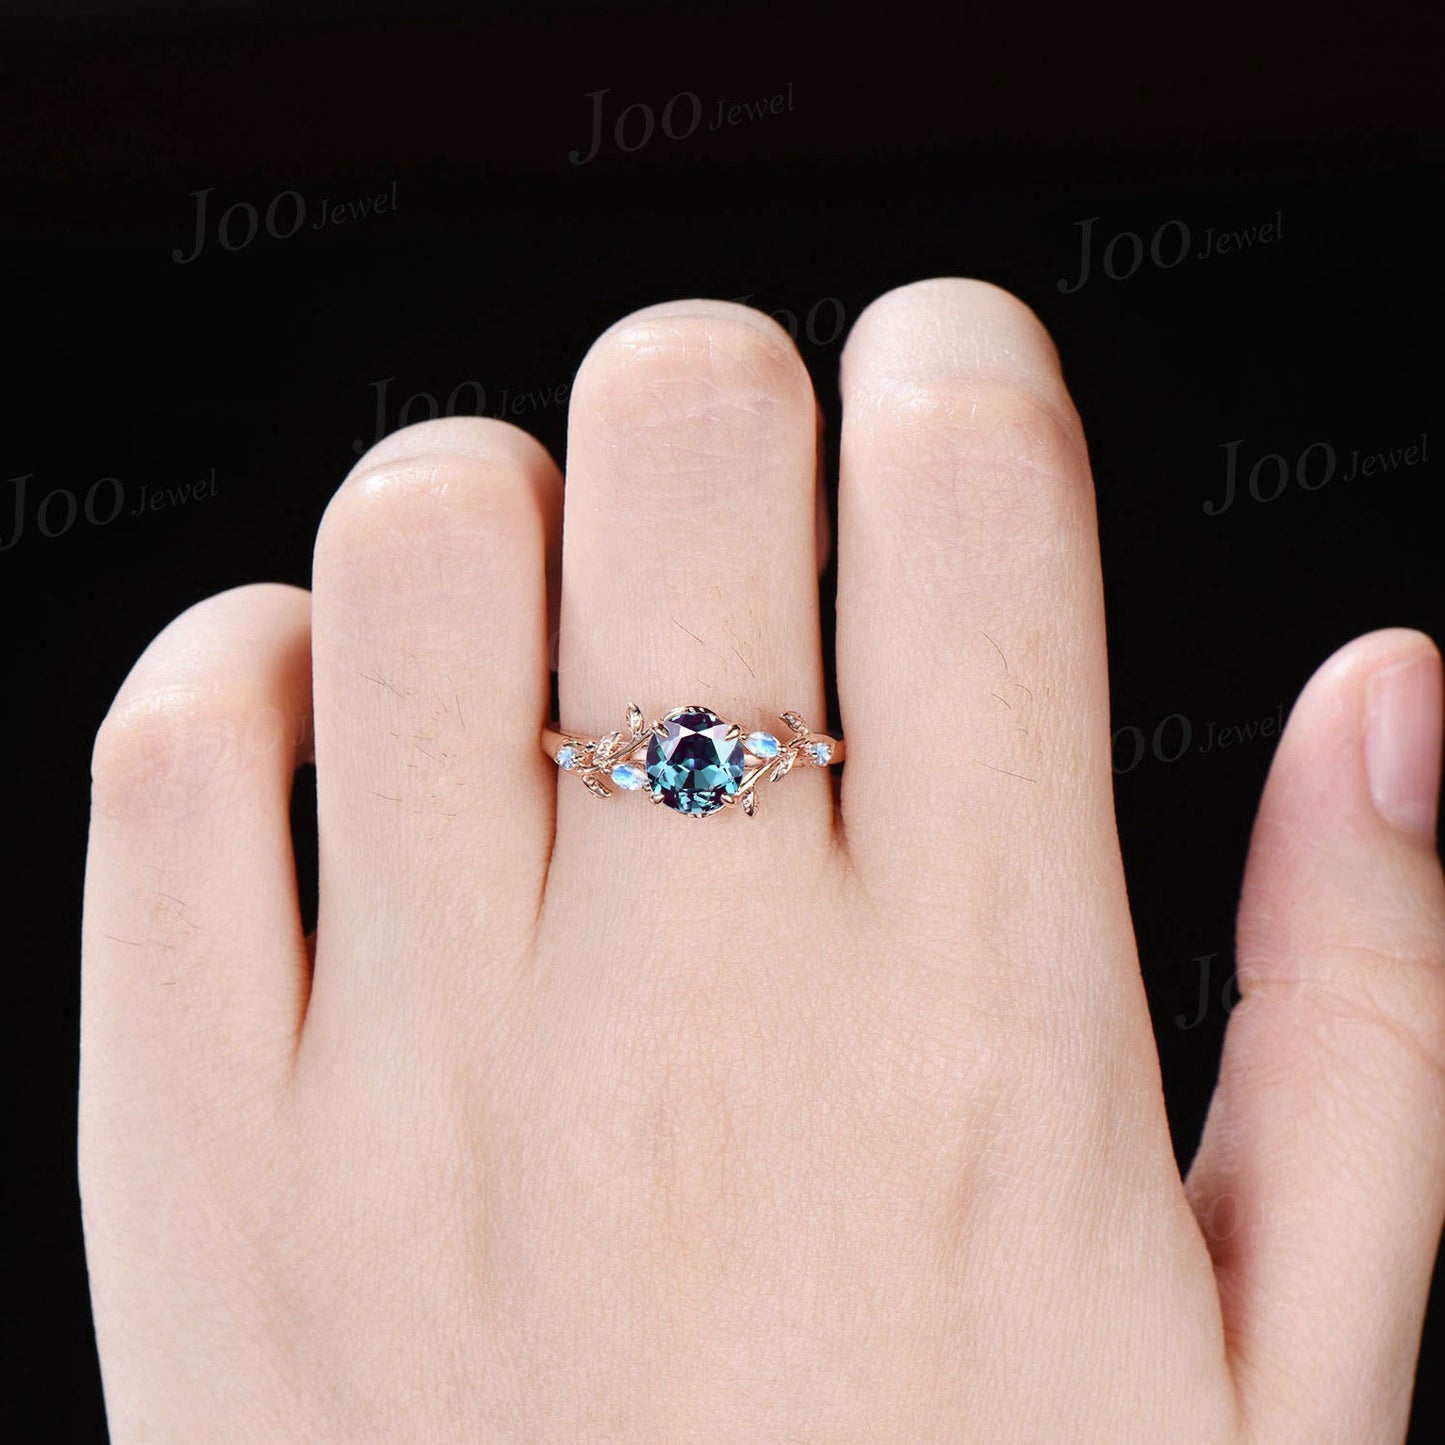 1ct Nature Inspired Round Cut Color-Change Alexandrite Moonstone Engagement Ring June Birthstone Jewelry Anniversary/Promise Gift for Women